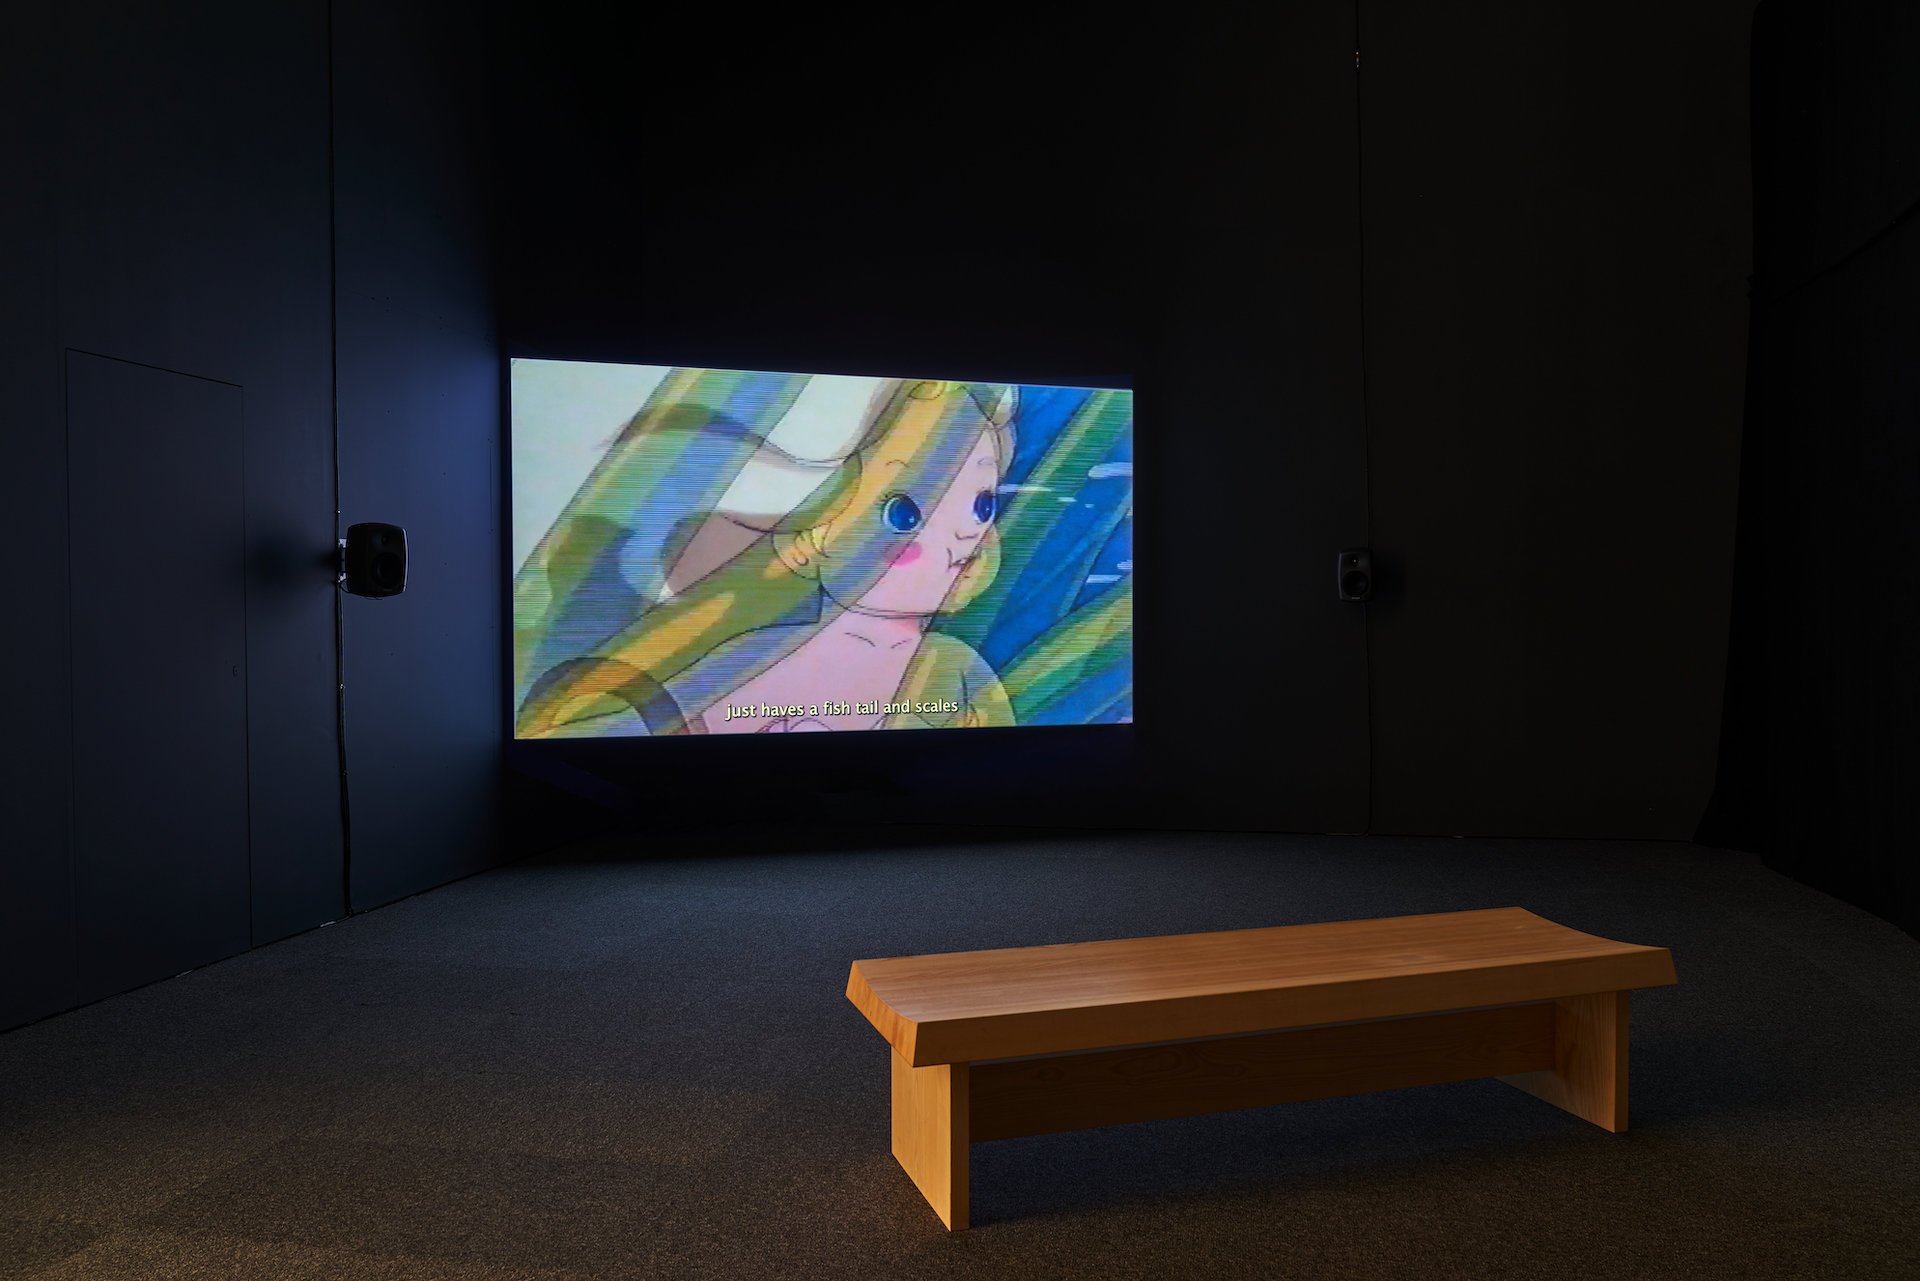  A still image of the asweetsea video installed in a dark room with a wooden bench in front of it. The still image depicts a white cartoon child with long very pale hair, large blue eyes and light pink-toned skin. Semi-translucent sea plants curve in